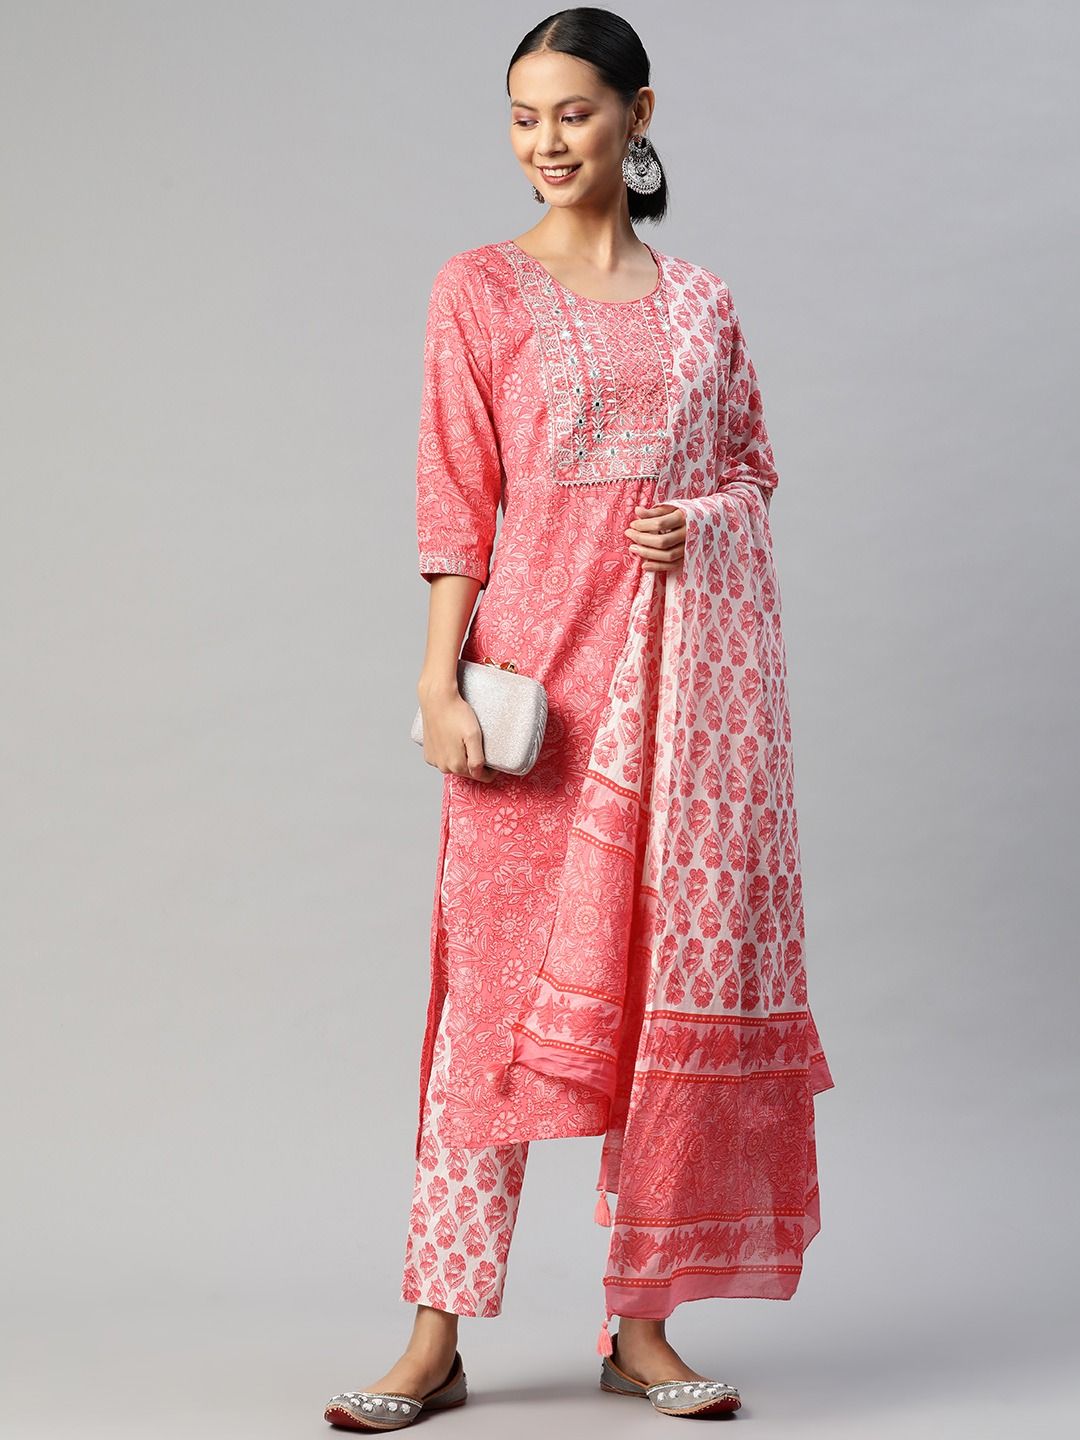 Straight Style Cotton Fabric Pink Color Kurta With Bottom And Dupatta